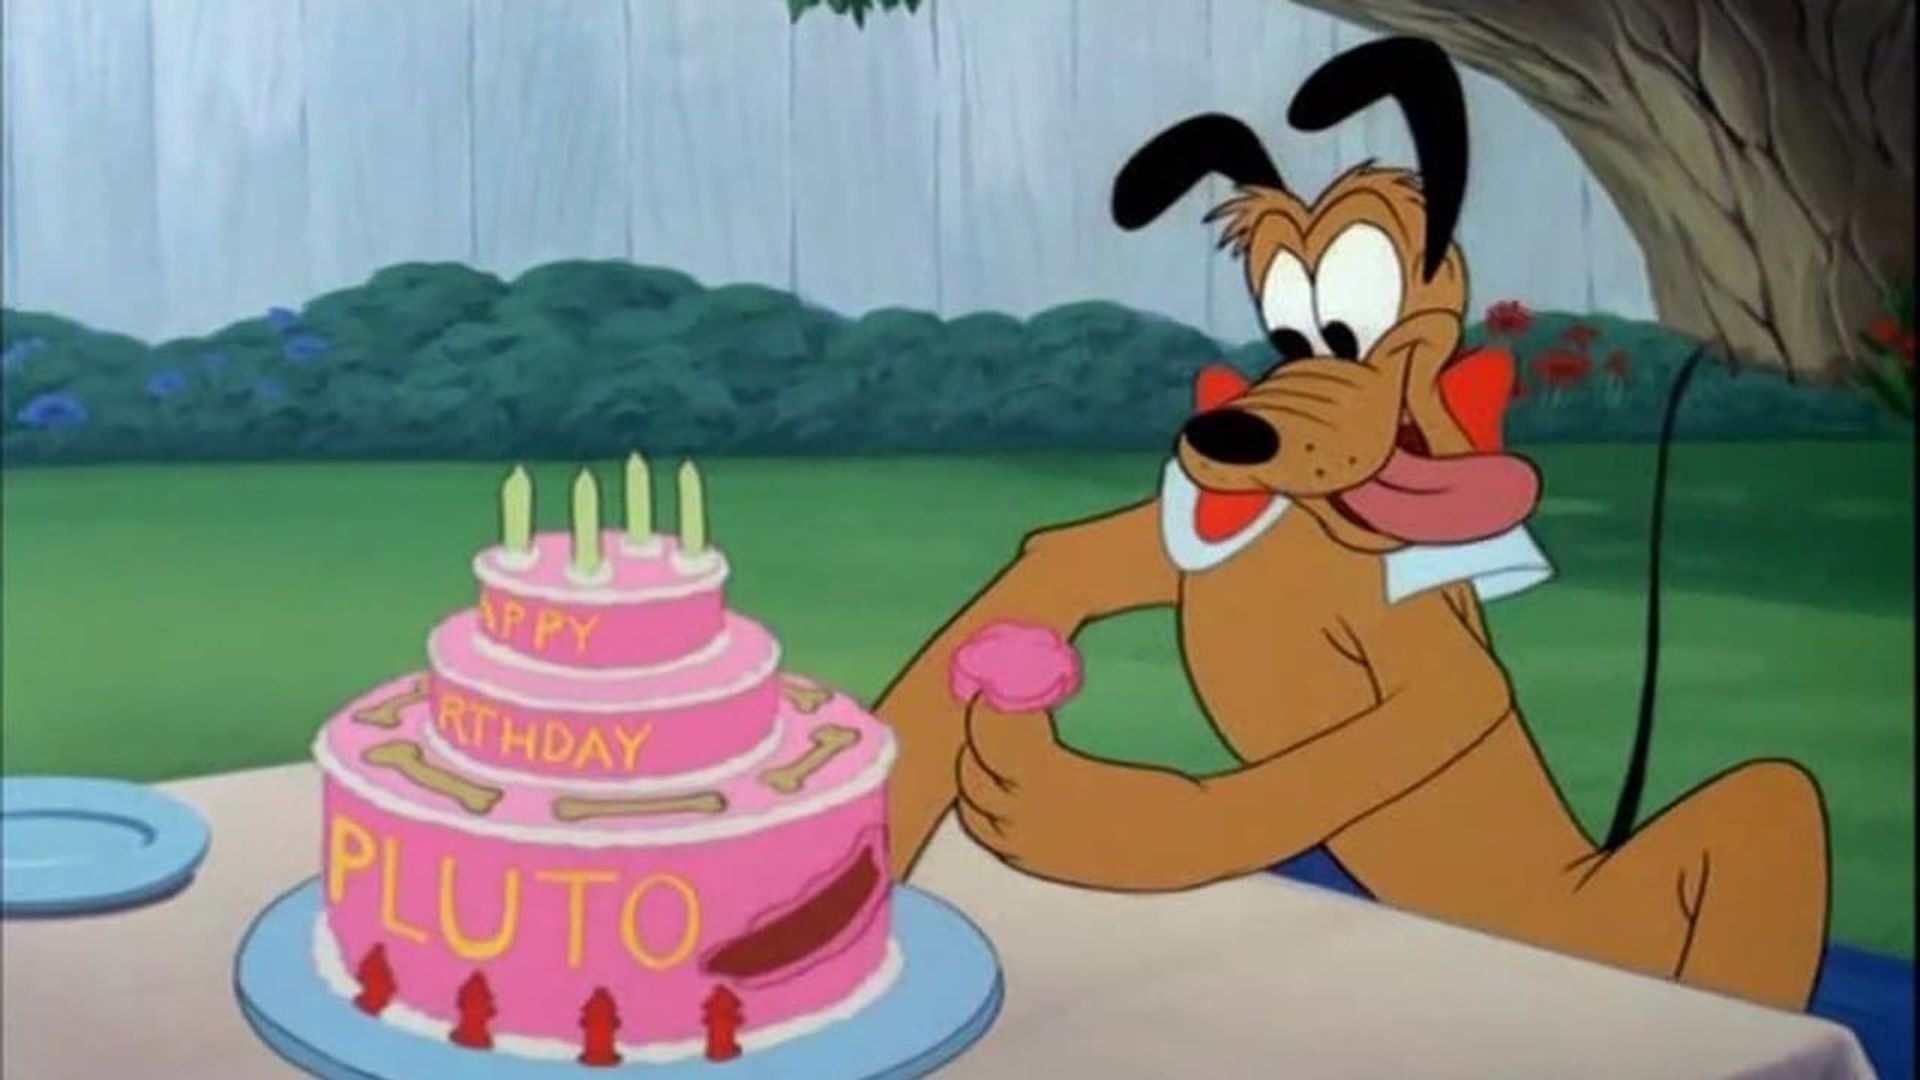 Pluto's Party background